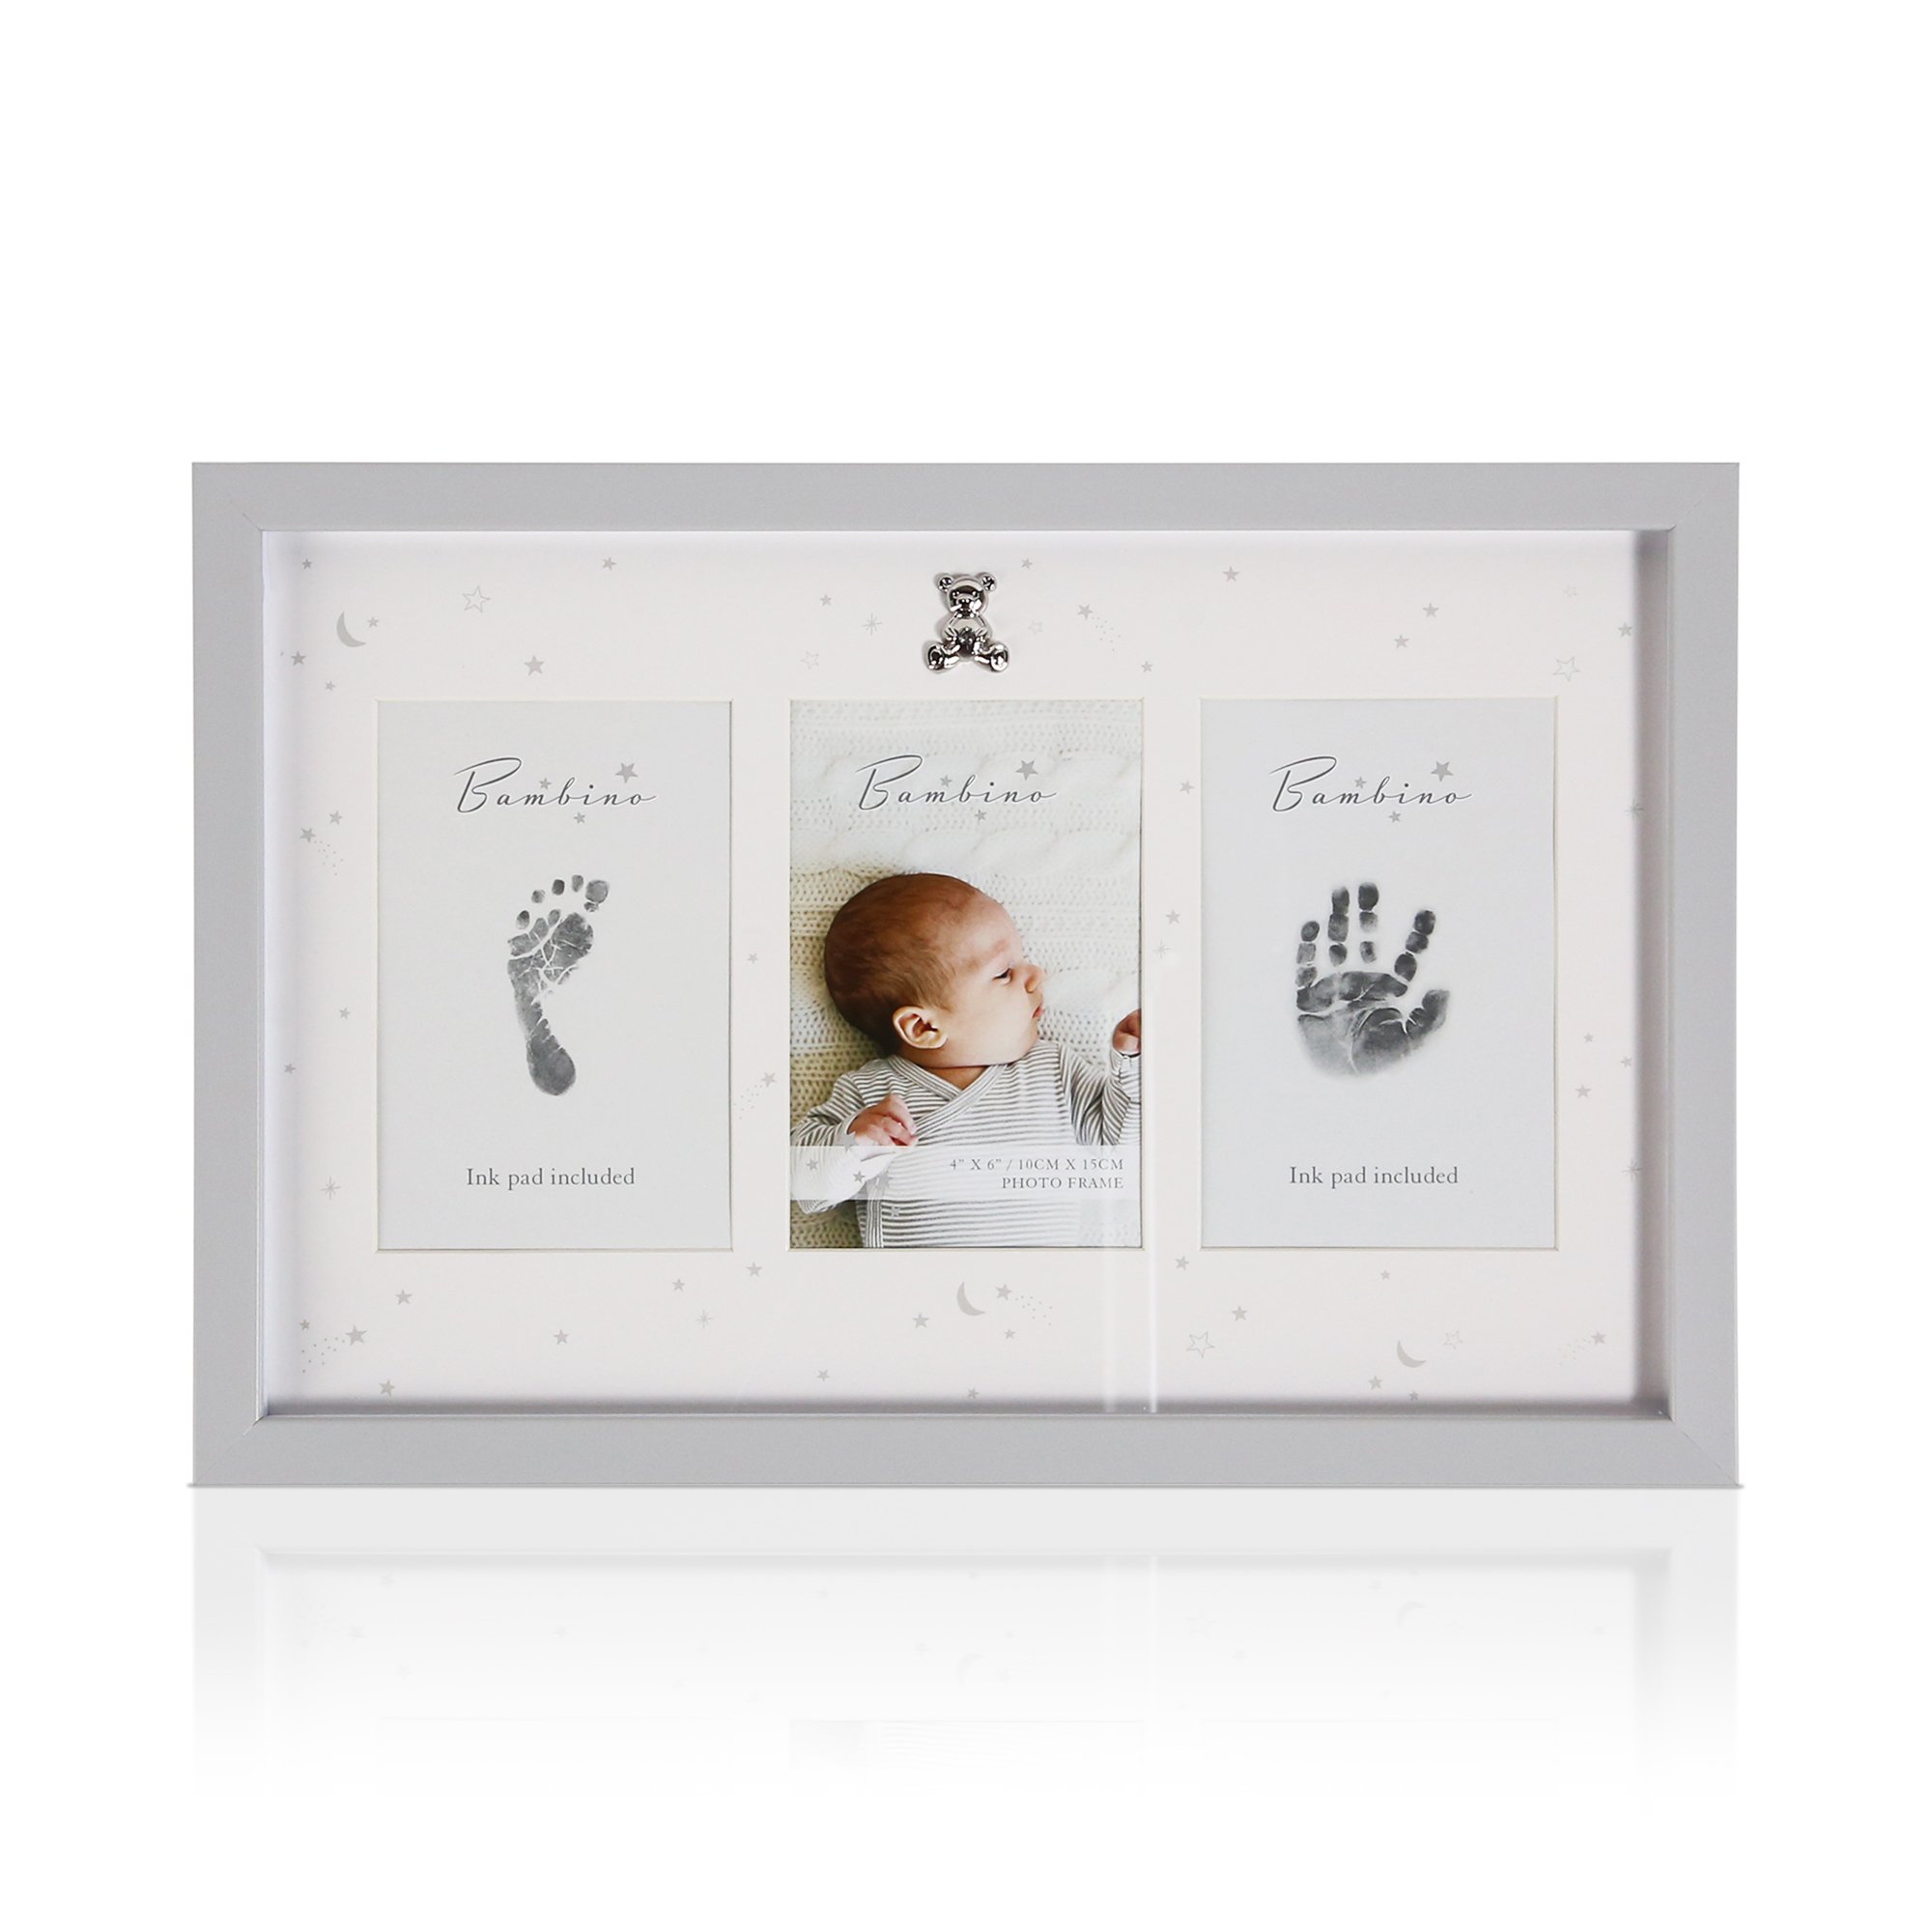 Moonpig Hand & Foot Print With Ink Pad Frame Toys & Games